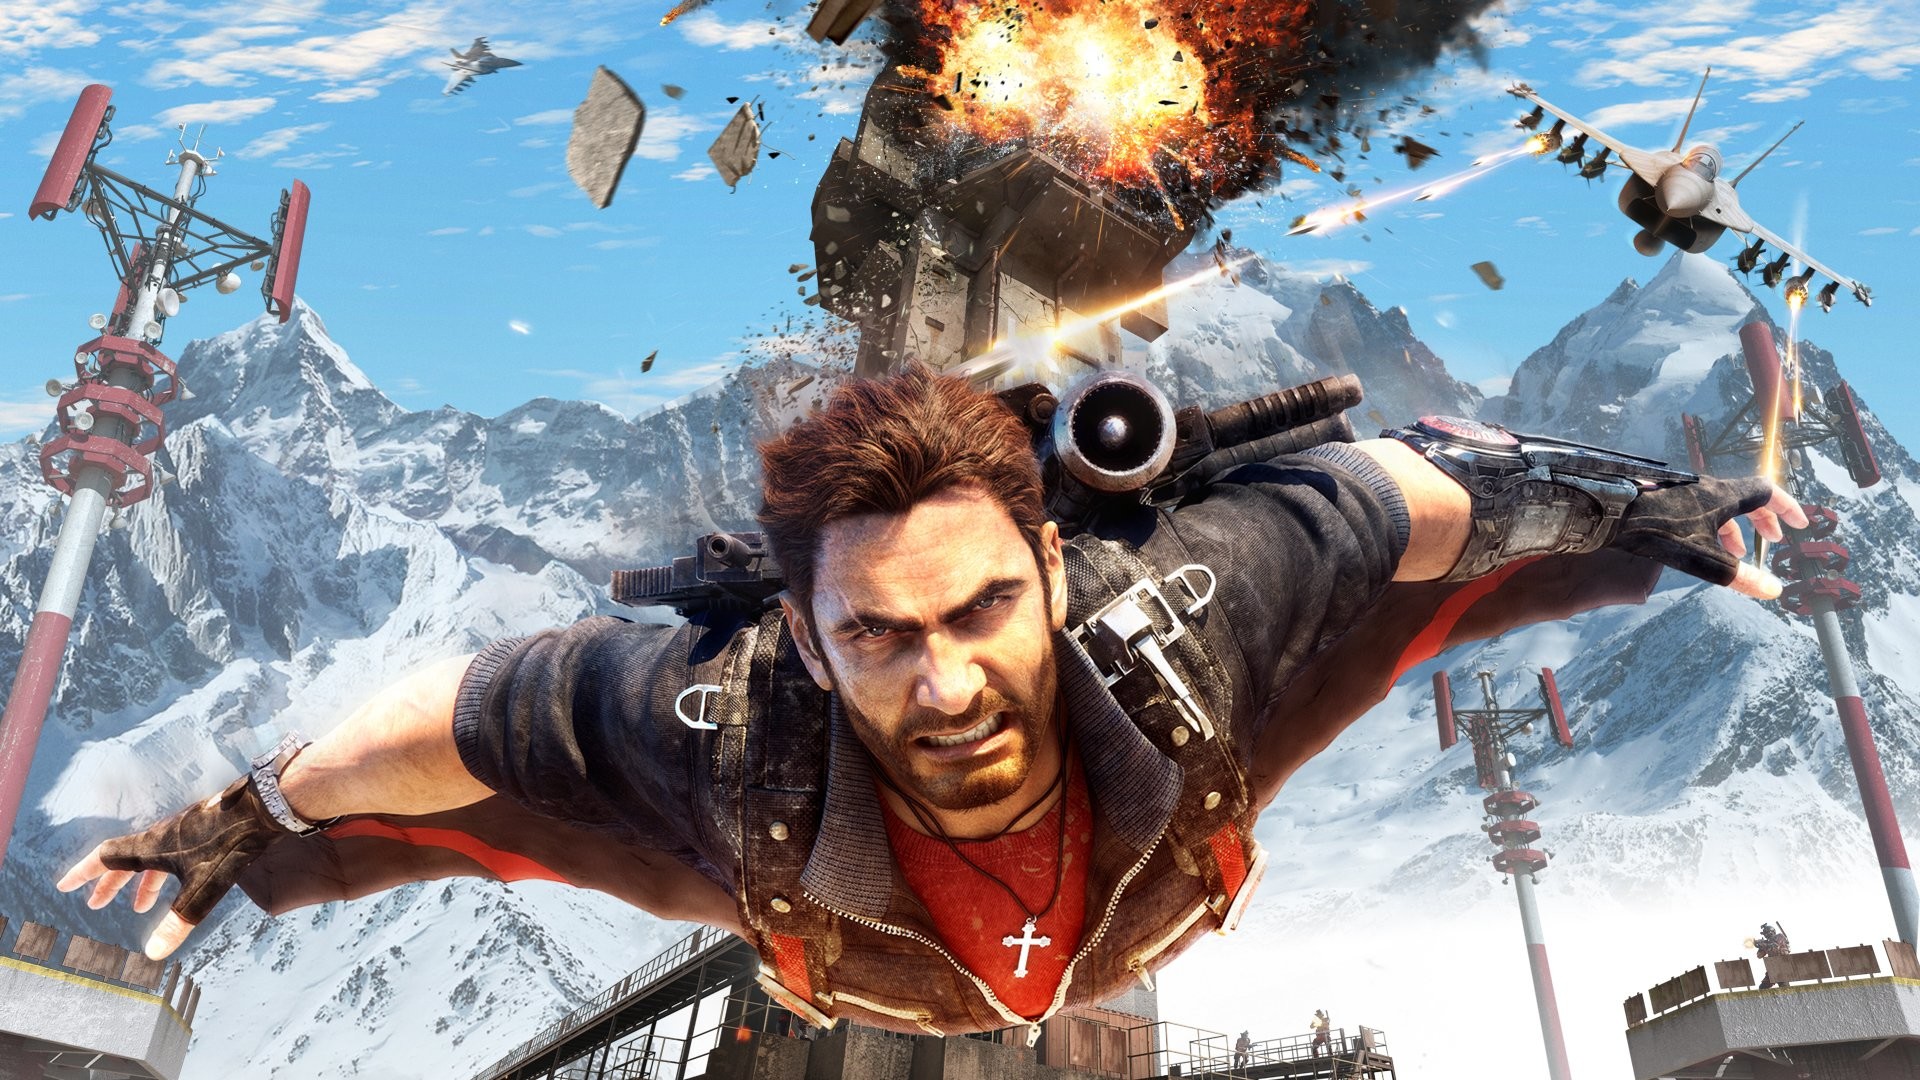 1920x1080 Just Cause 3 Torrent Instructions